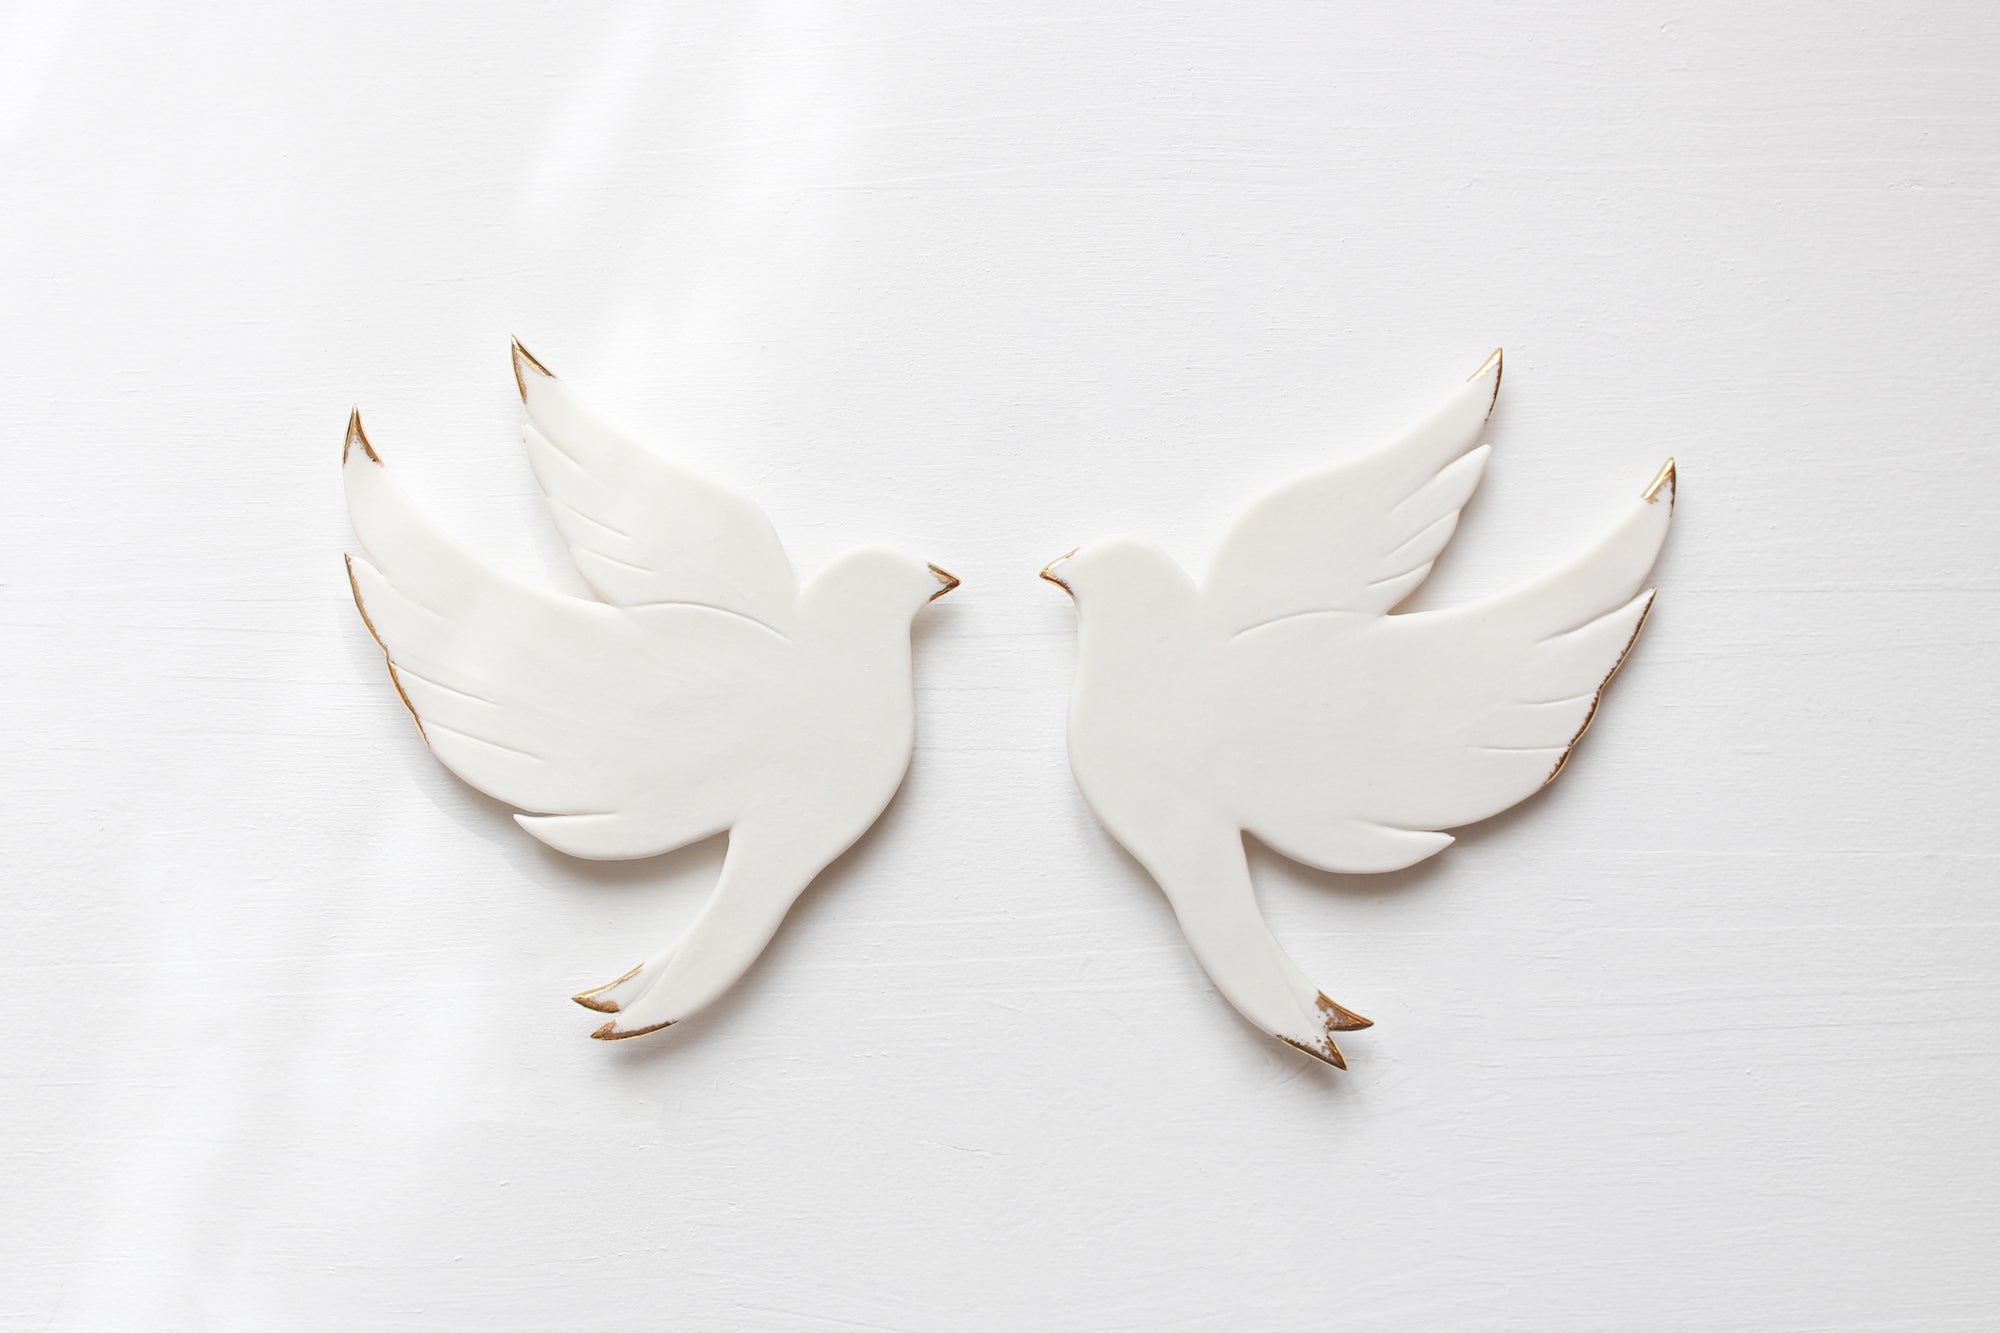 Porcelain Doves for Wall Decoration by Alain Granell